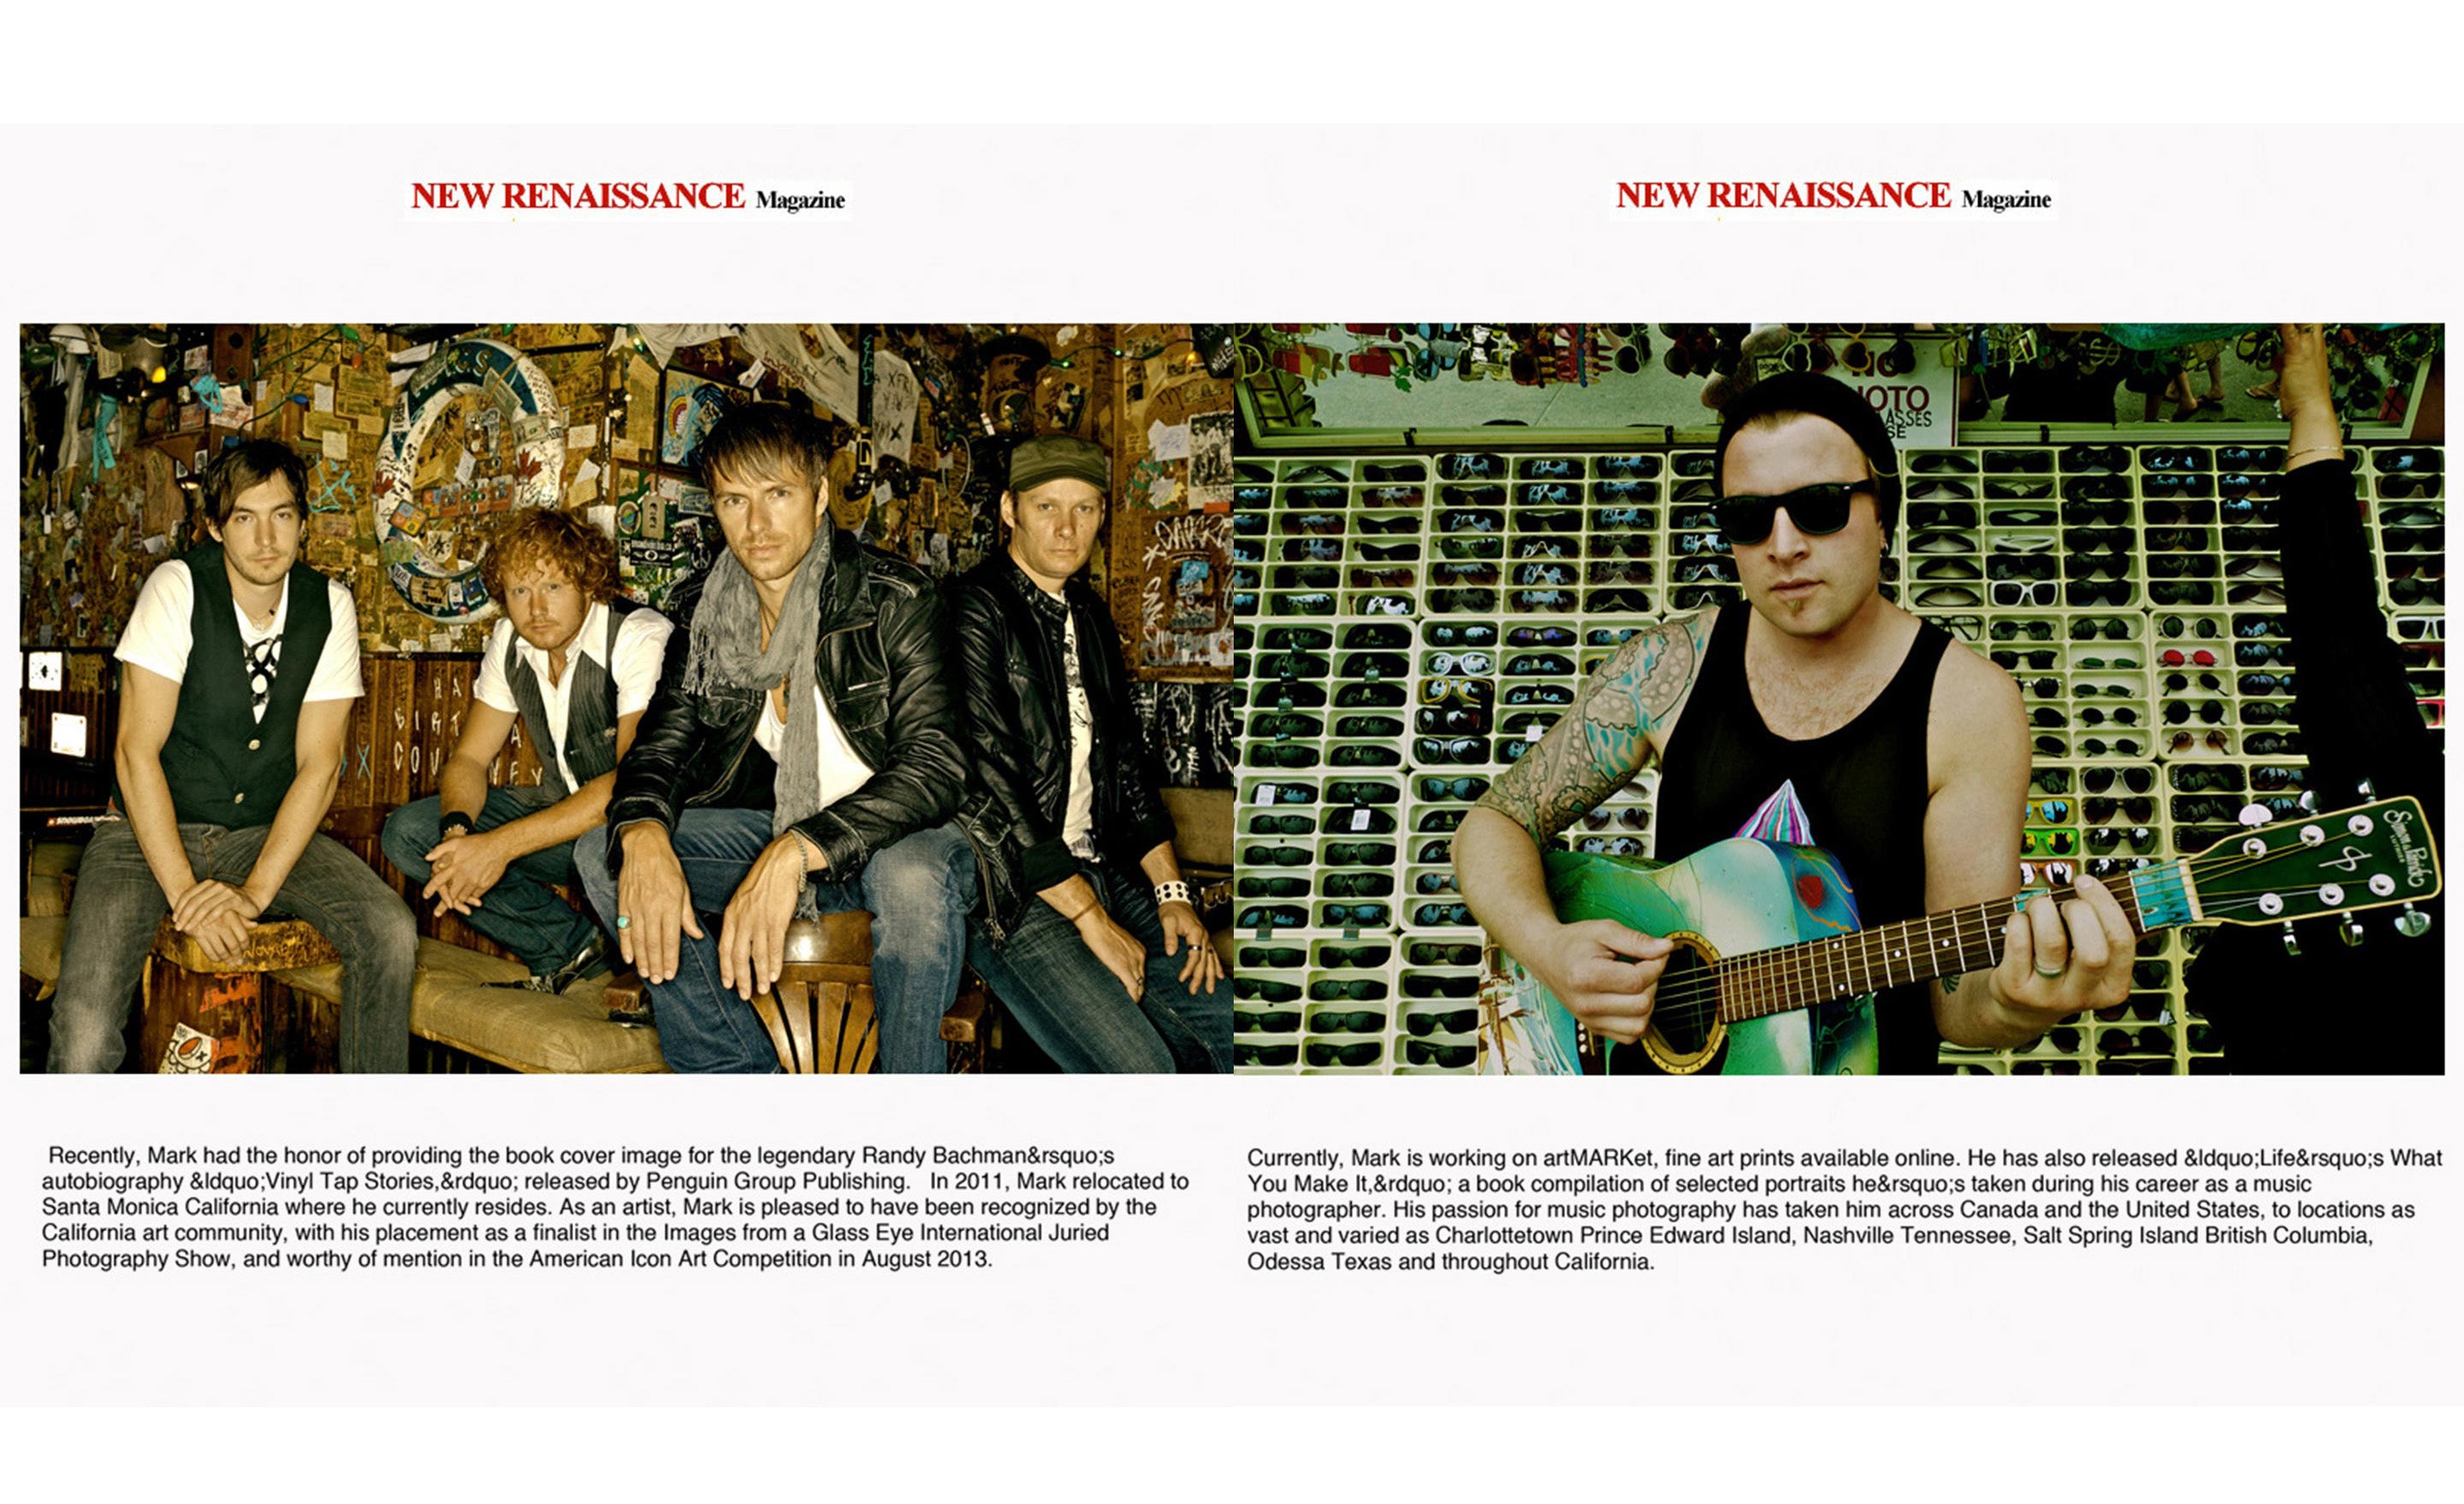 Magazine article Los Angeles based Mark Maryanovich Photography page 2 band portrait four members sitting against wall covered in paper shreds with portrait of musician wearing sunglasses while strumming blue guitar standing in front of rows of sunglasses on opposite side Publication New Renaissance Magazine